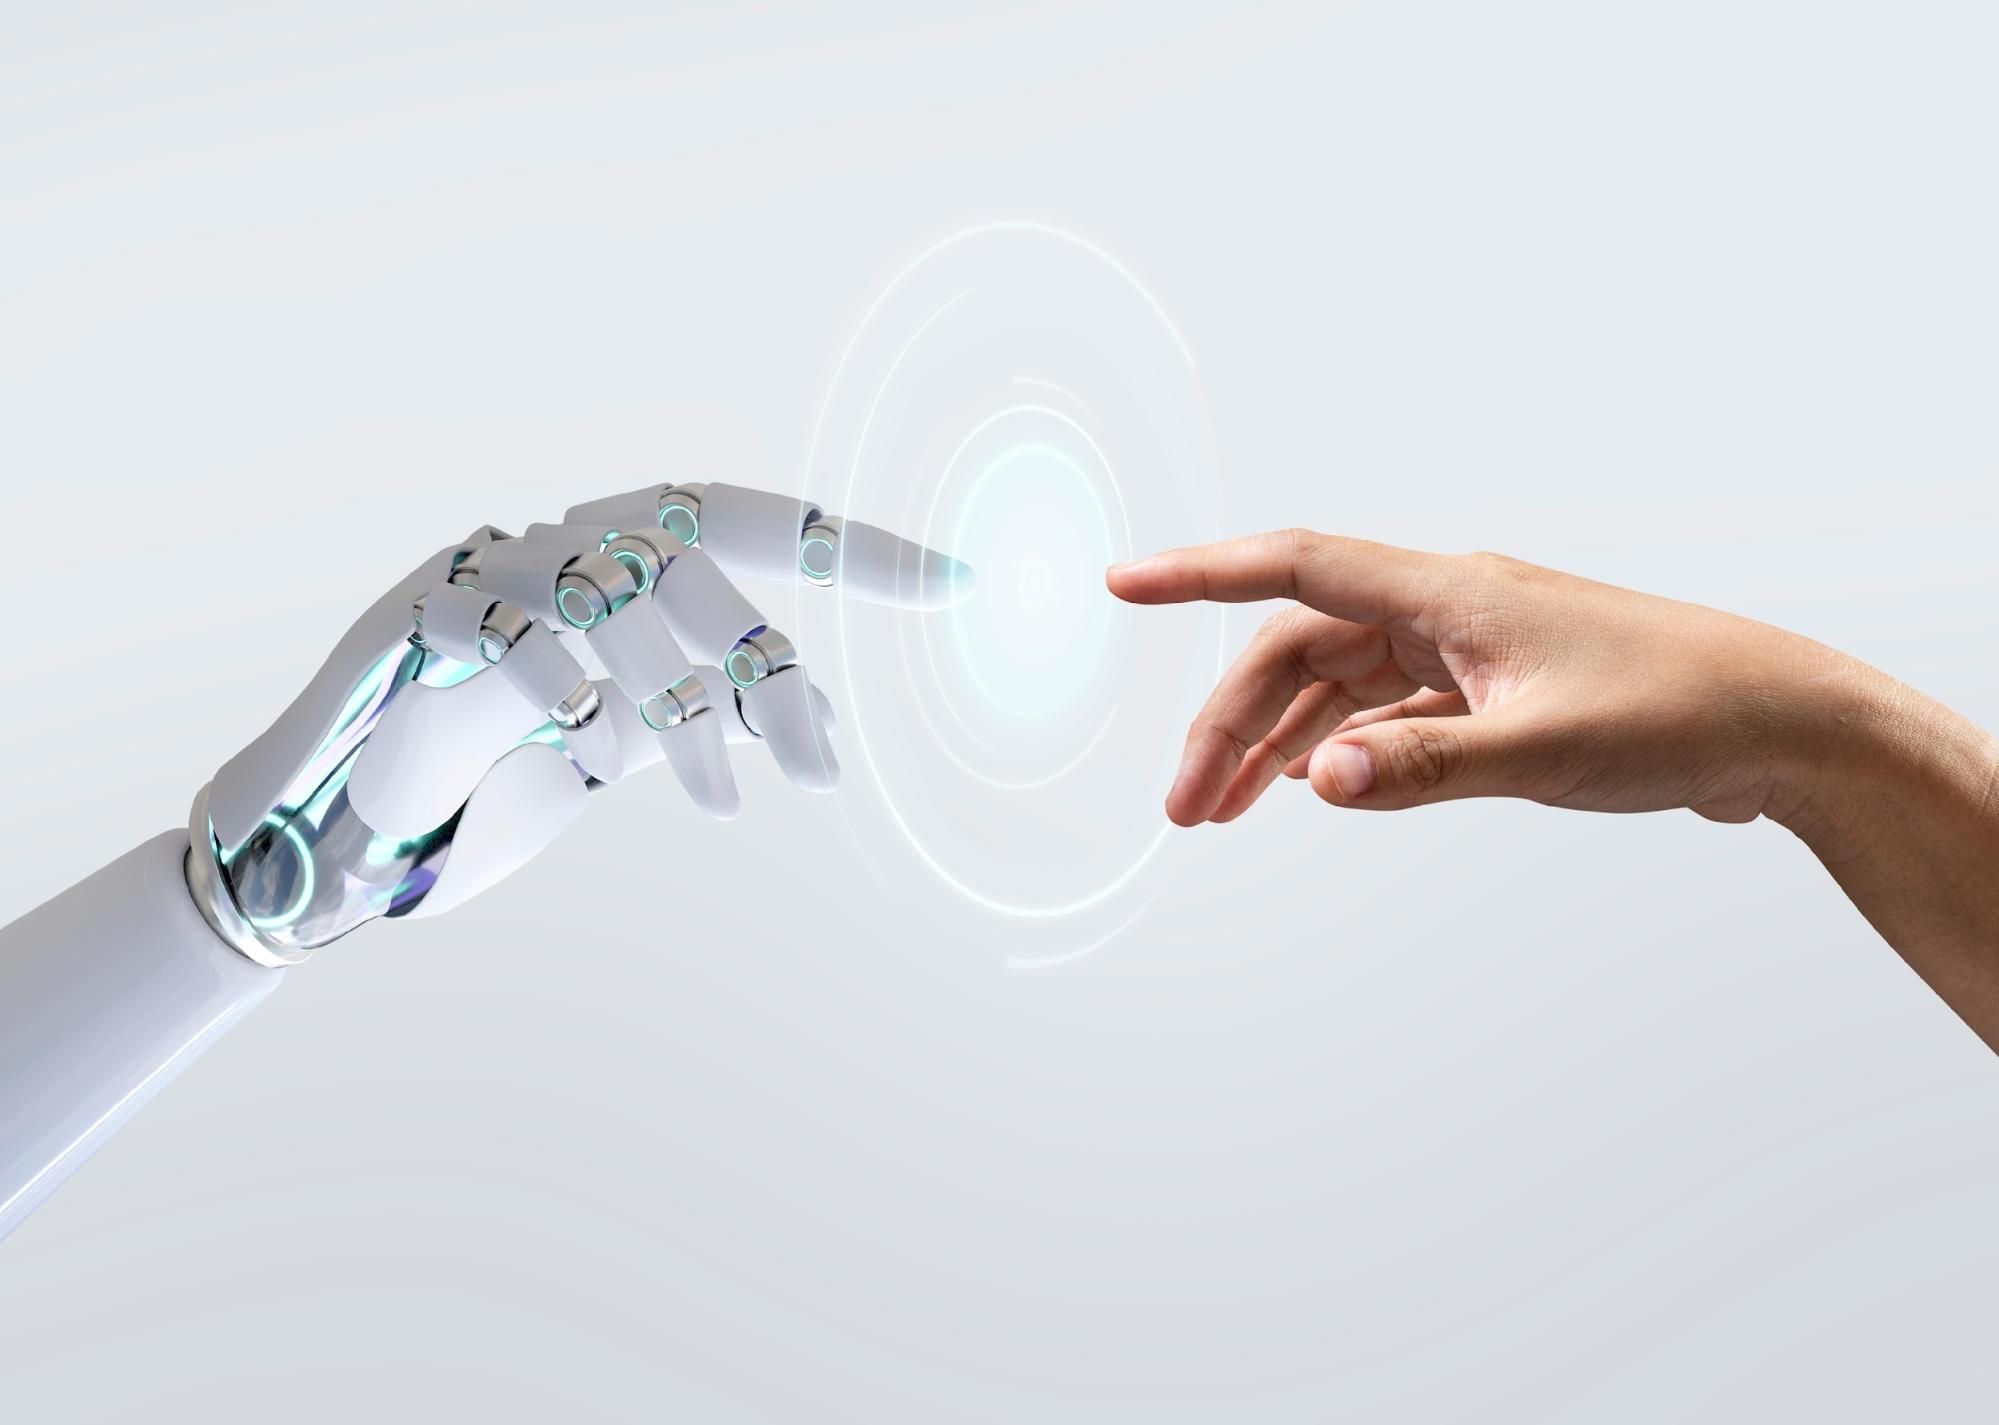 Robot "AI" hand and human hand pointing towards each other